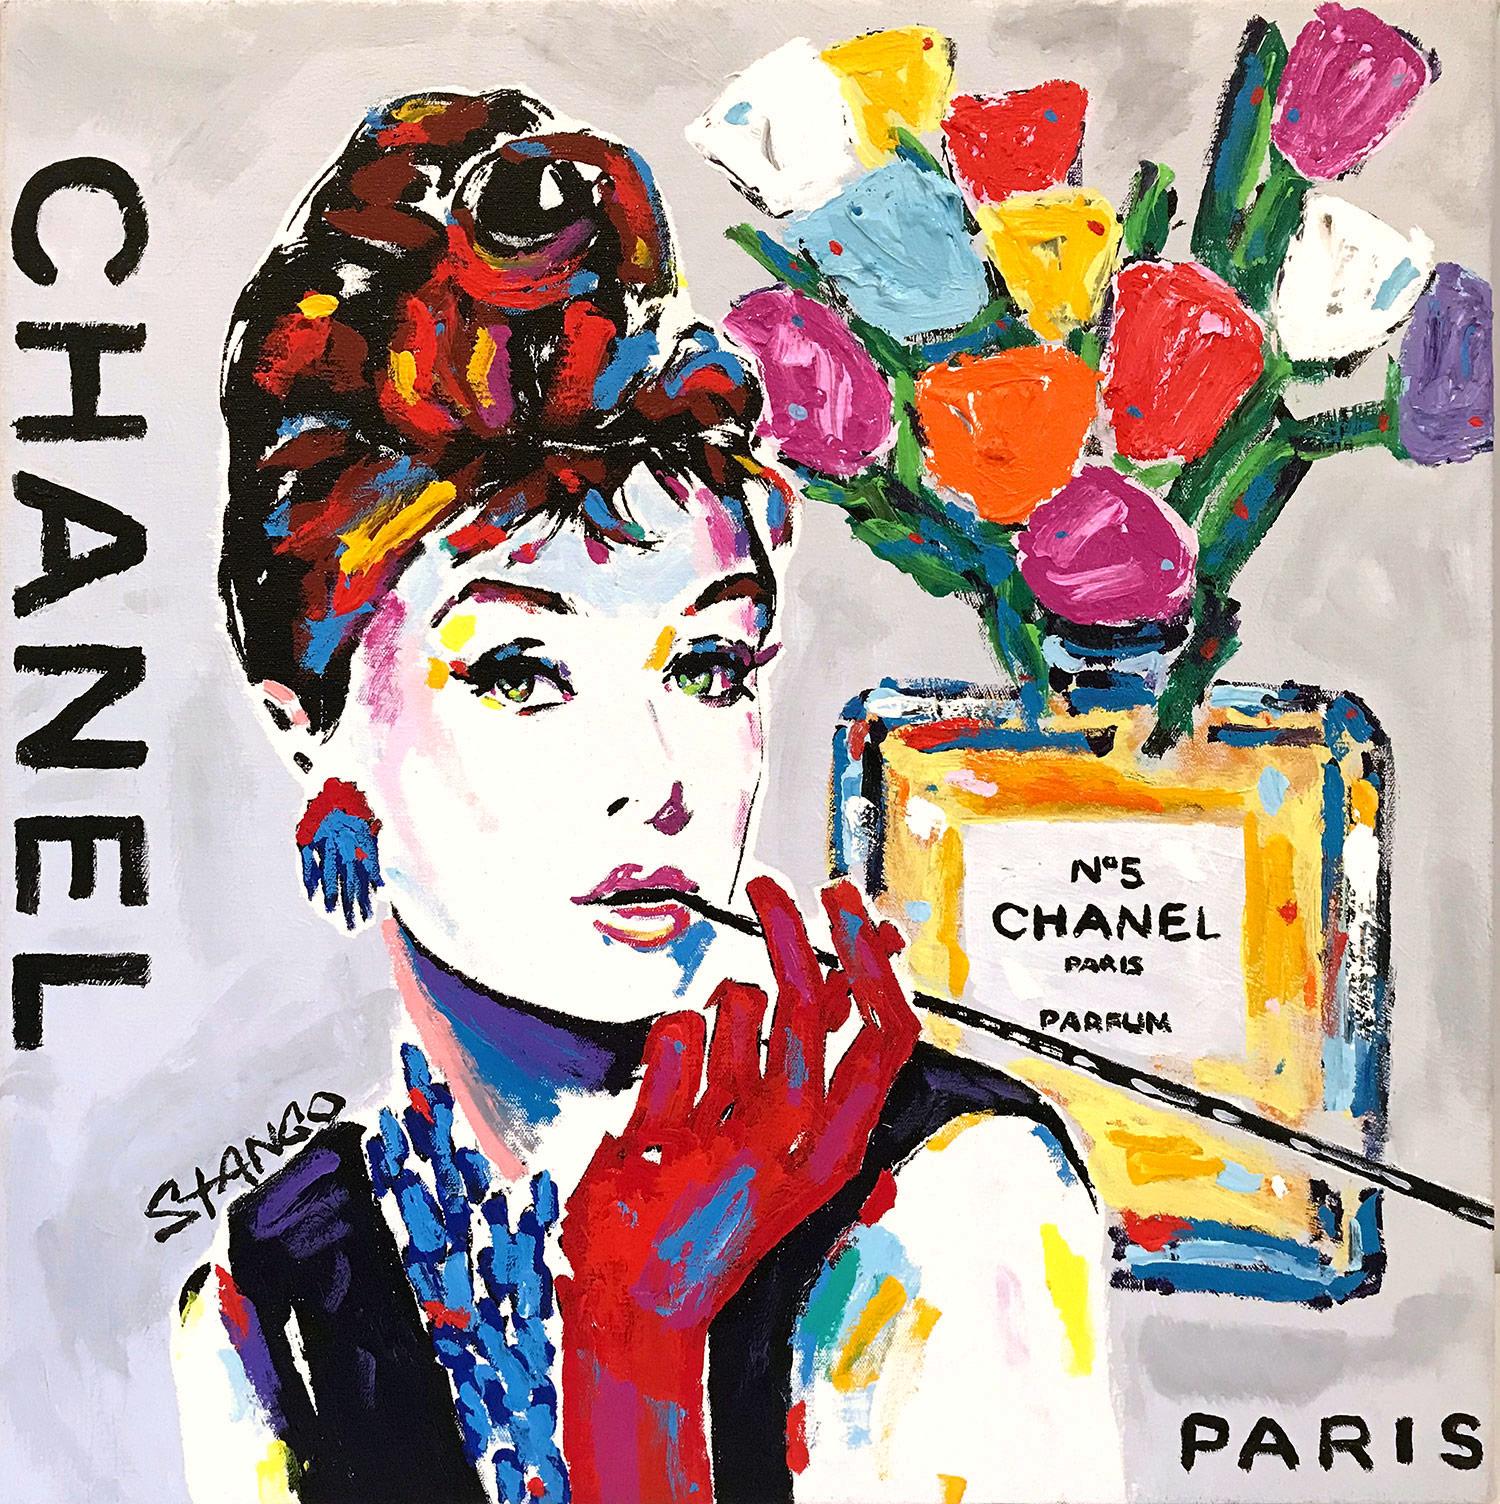 John Stango Abstract Painting - "A Little Silver" Audrey Hepburn & Chanel No5 Pop Art Acrylic Painting on Canvas